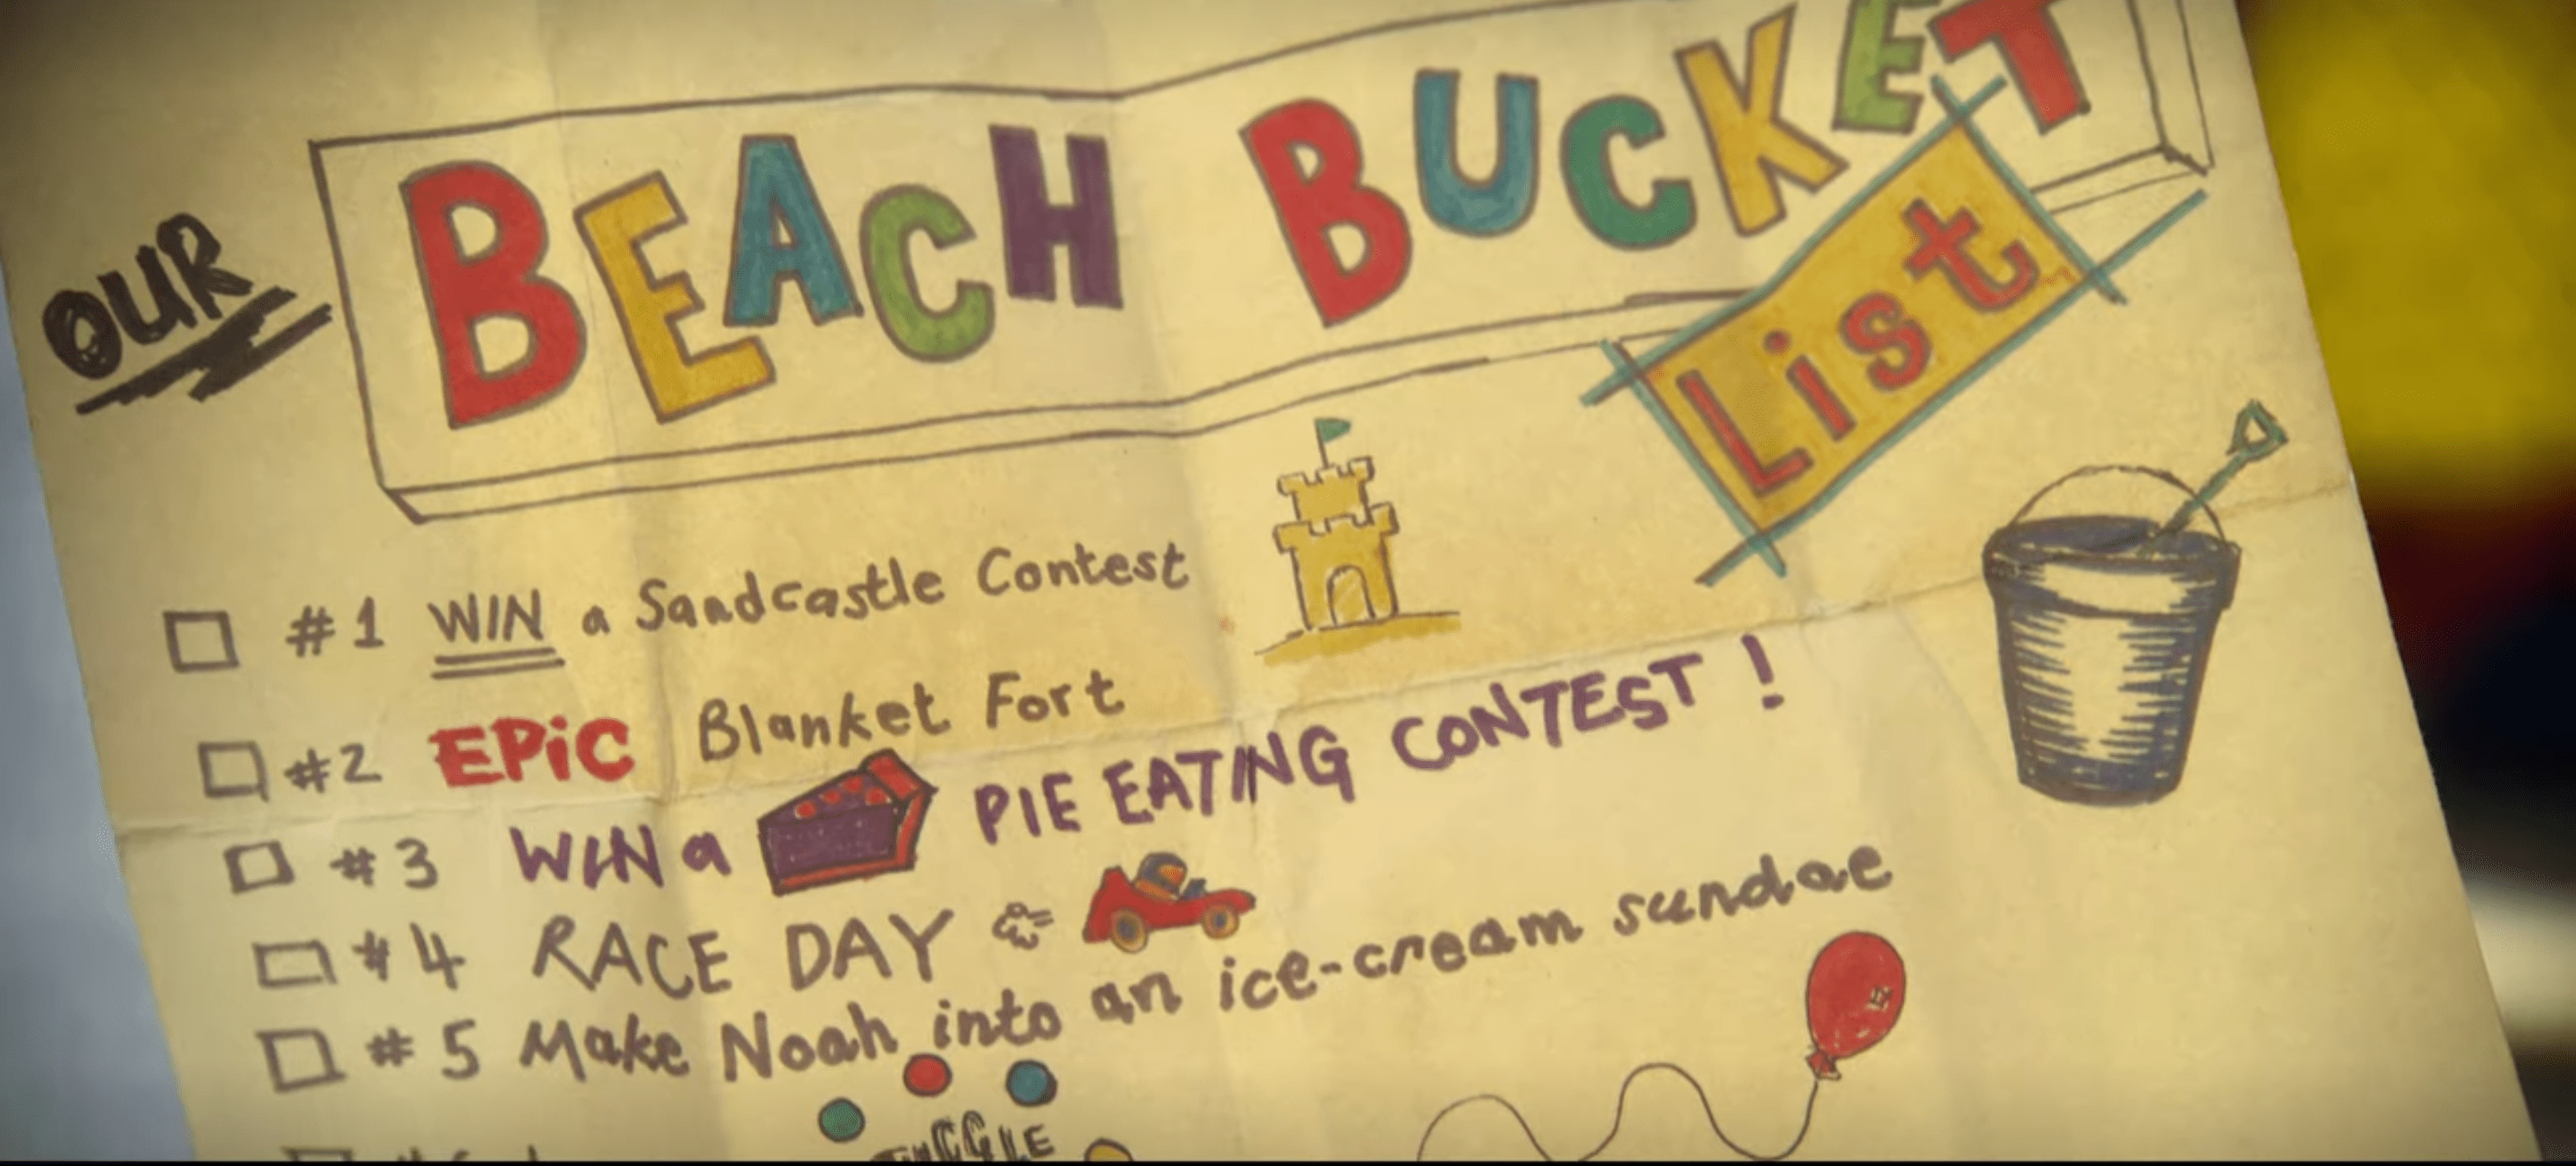 "Our Beach Bucket List" a decorated list including 1. Win a sandcastle contest, 2. Epic blanket fort, 3. Win a pie eating contest, 4. race day, 5. Make Noah into an ice cream sundae.